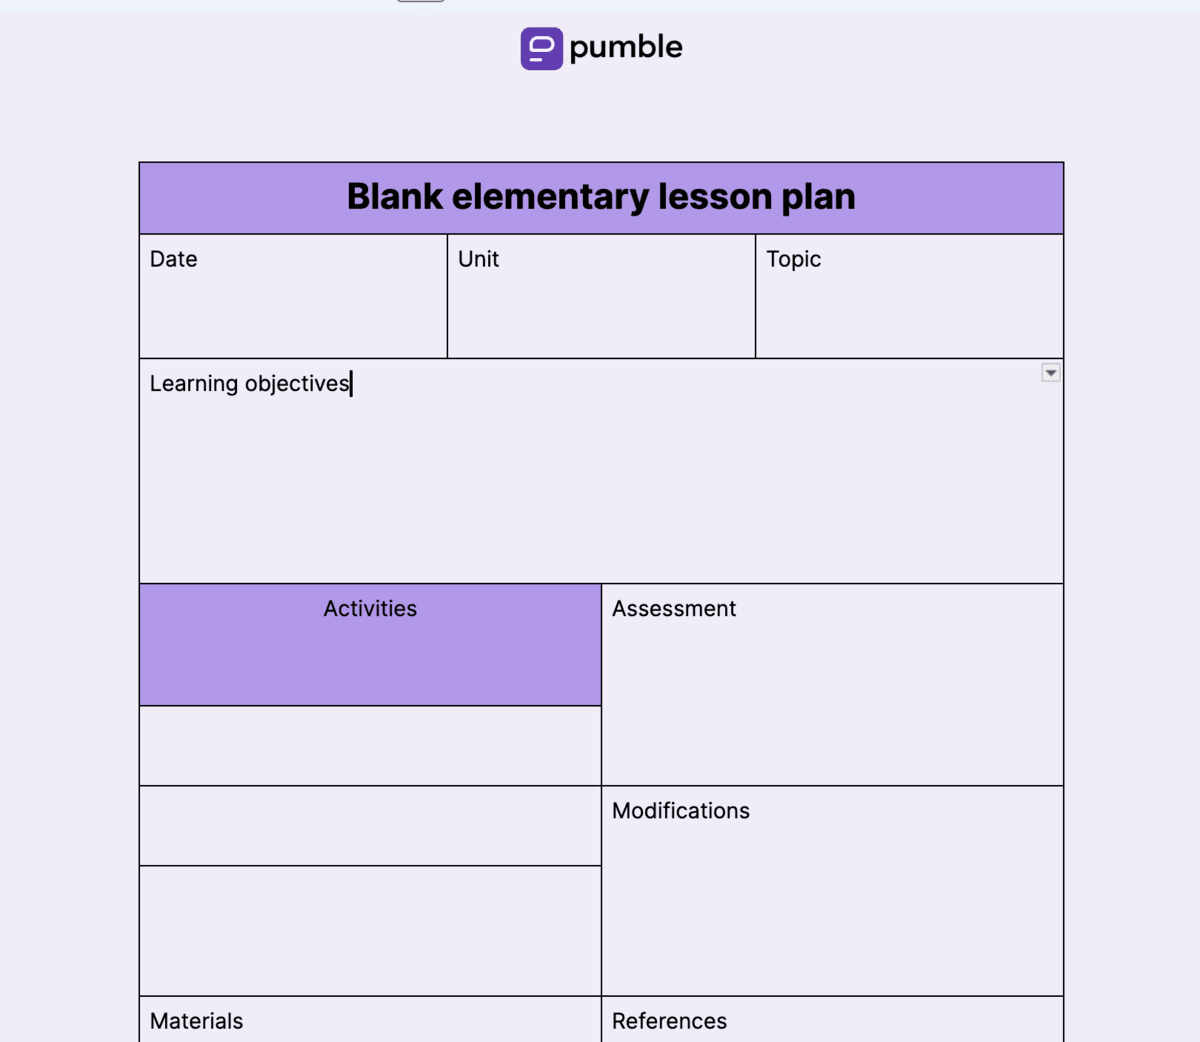 Blank elementary lesson plan template